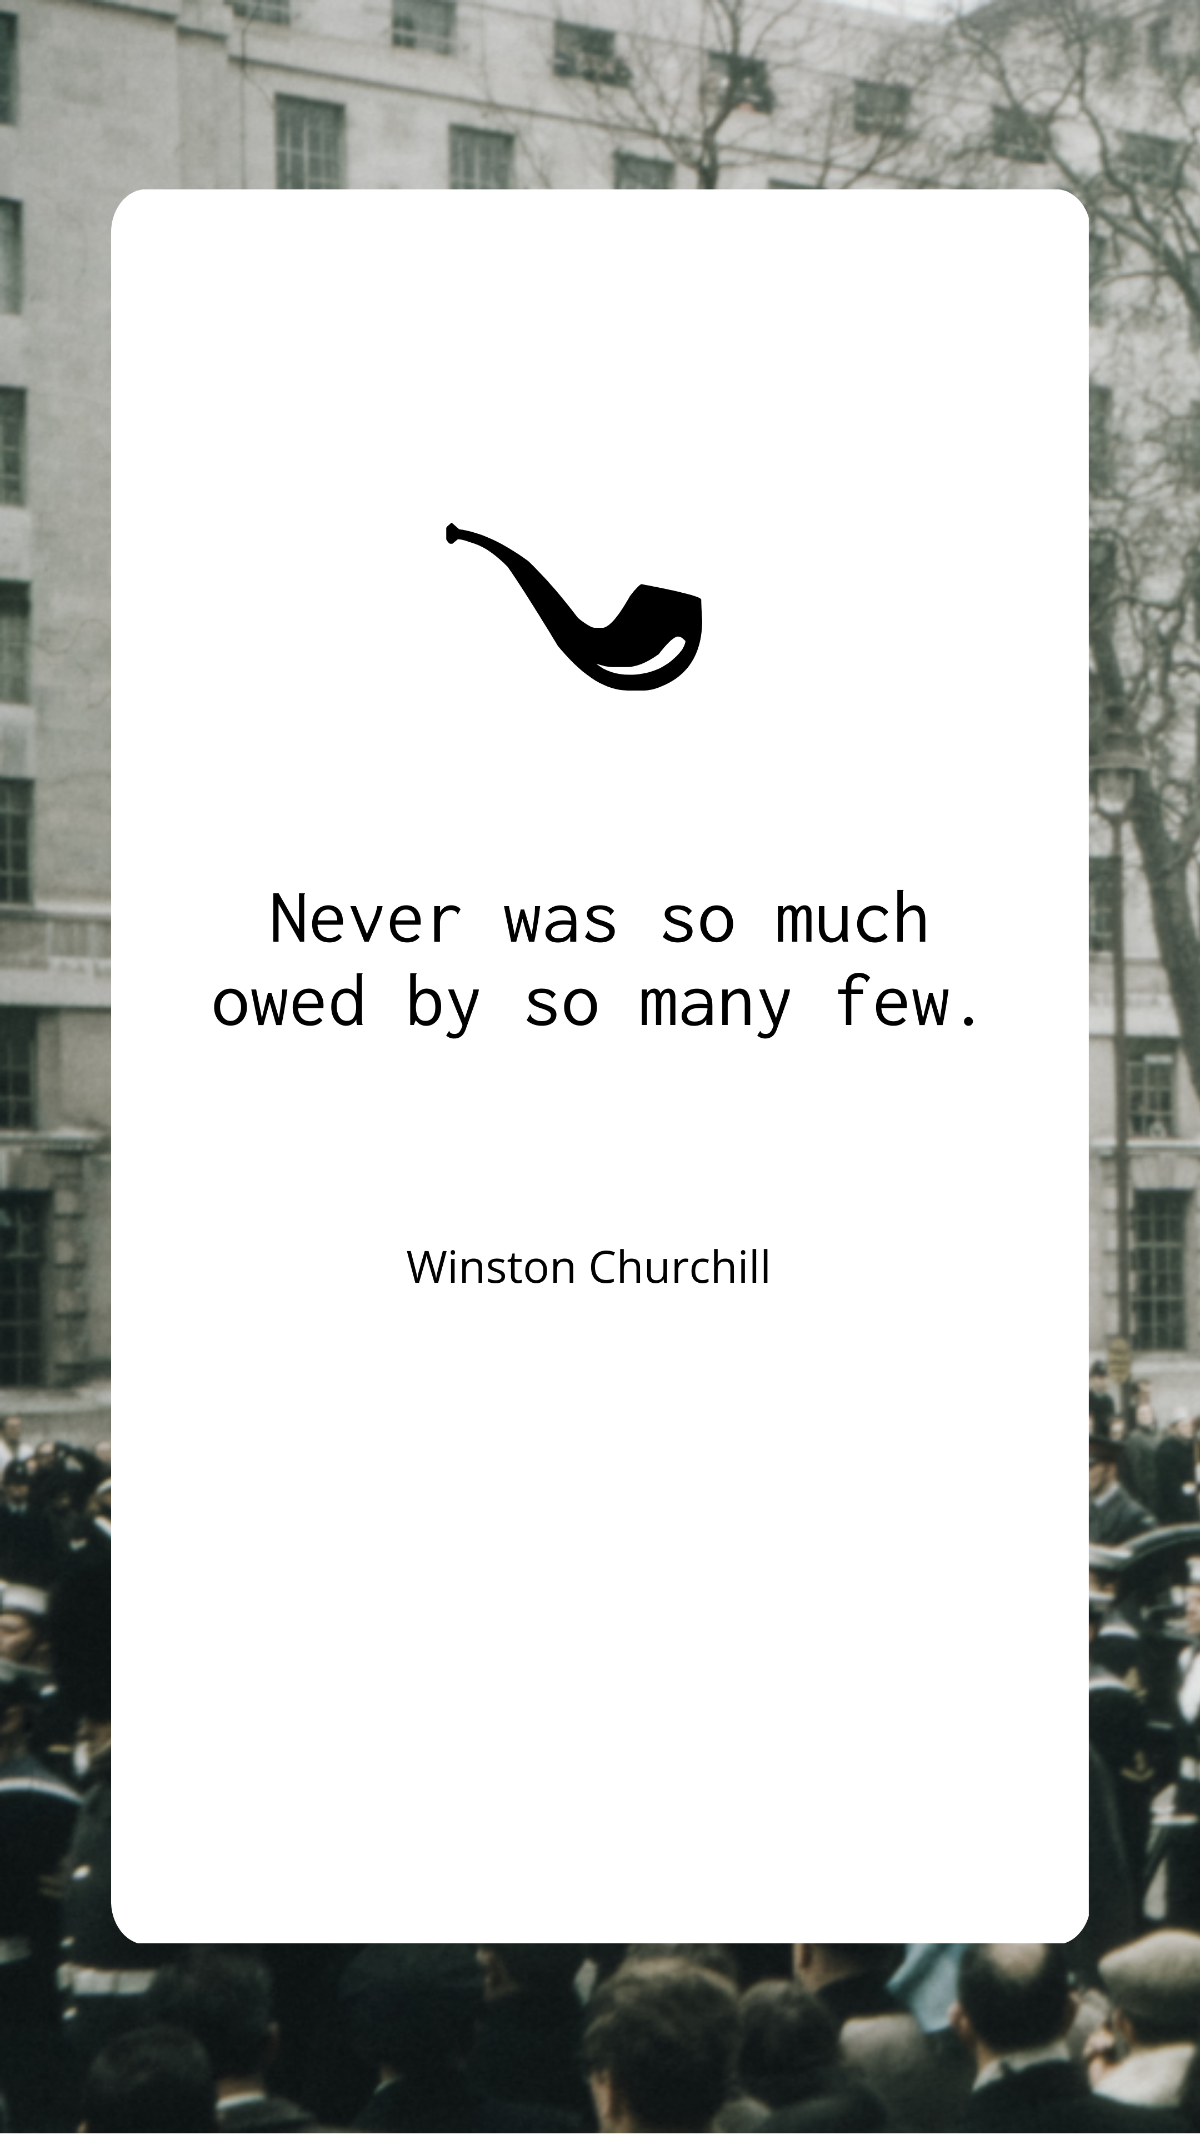 Winston Churchill - "Never was so much owed by so many few.”